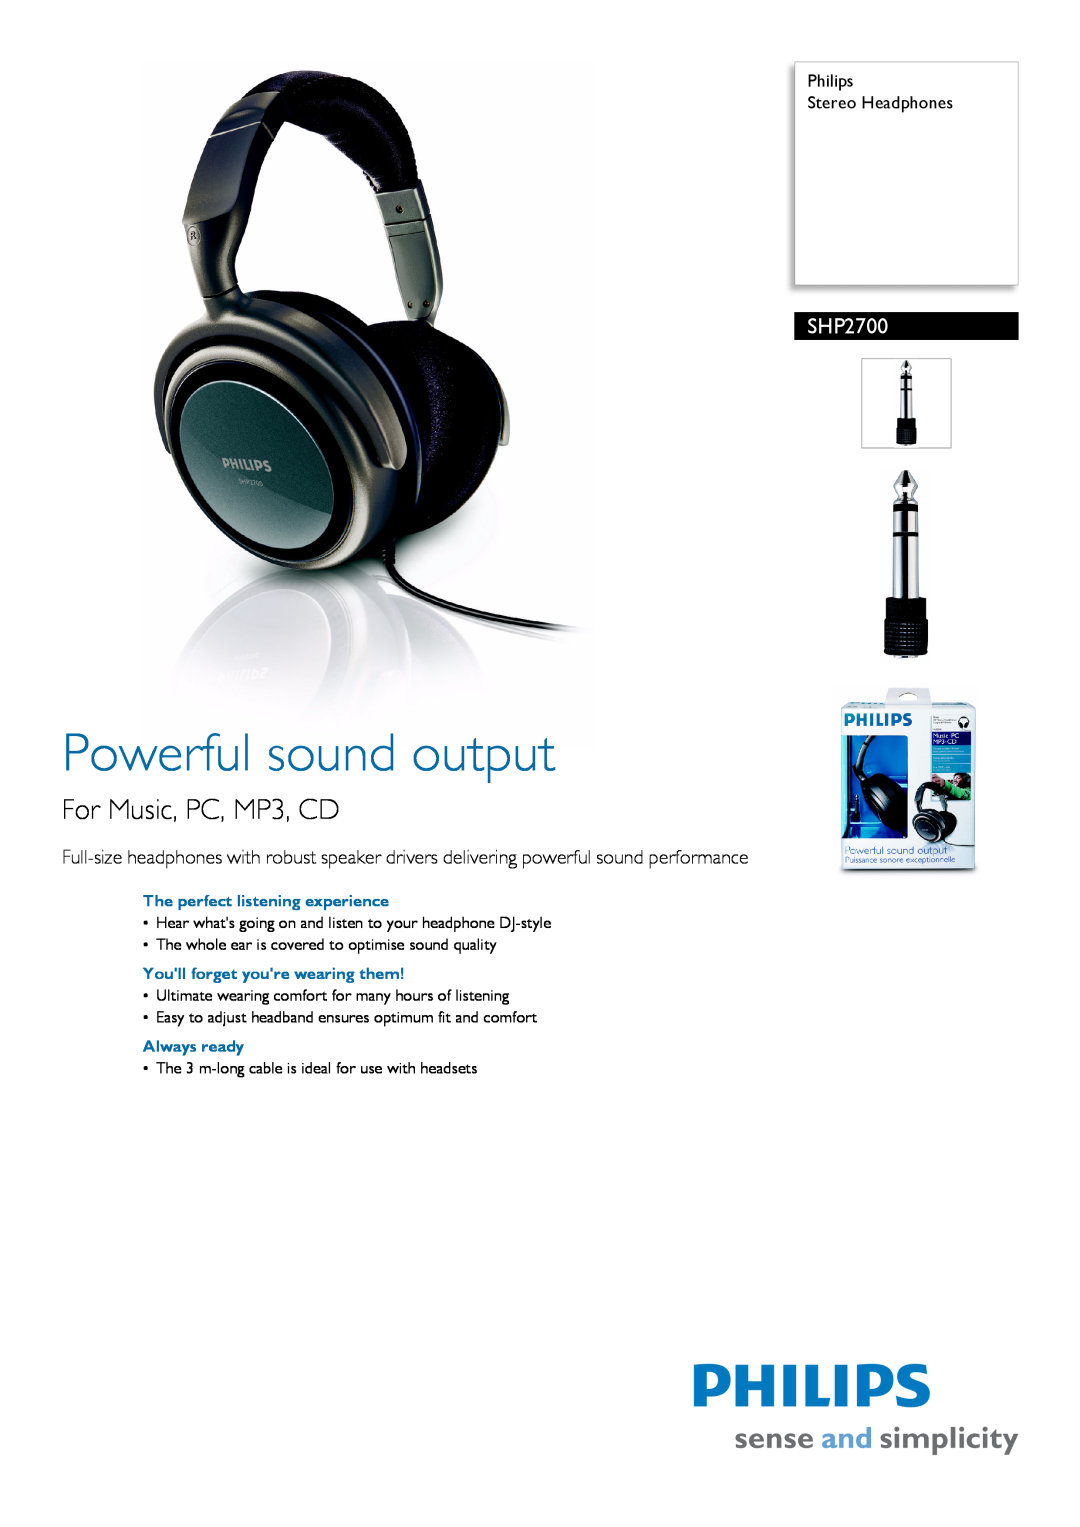 Philips SHP2700 manual Philips Stereo Headphones, The perfect listening experience, Youll forget youre wearing them 